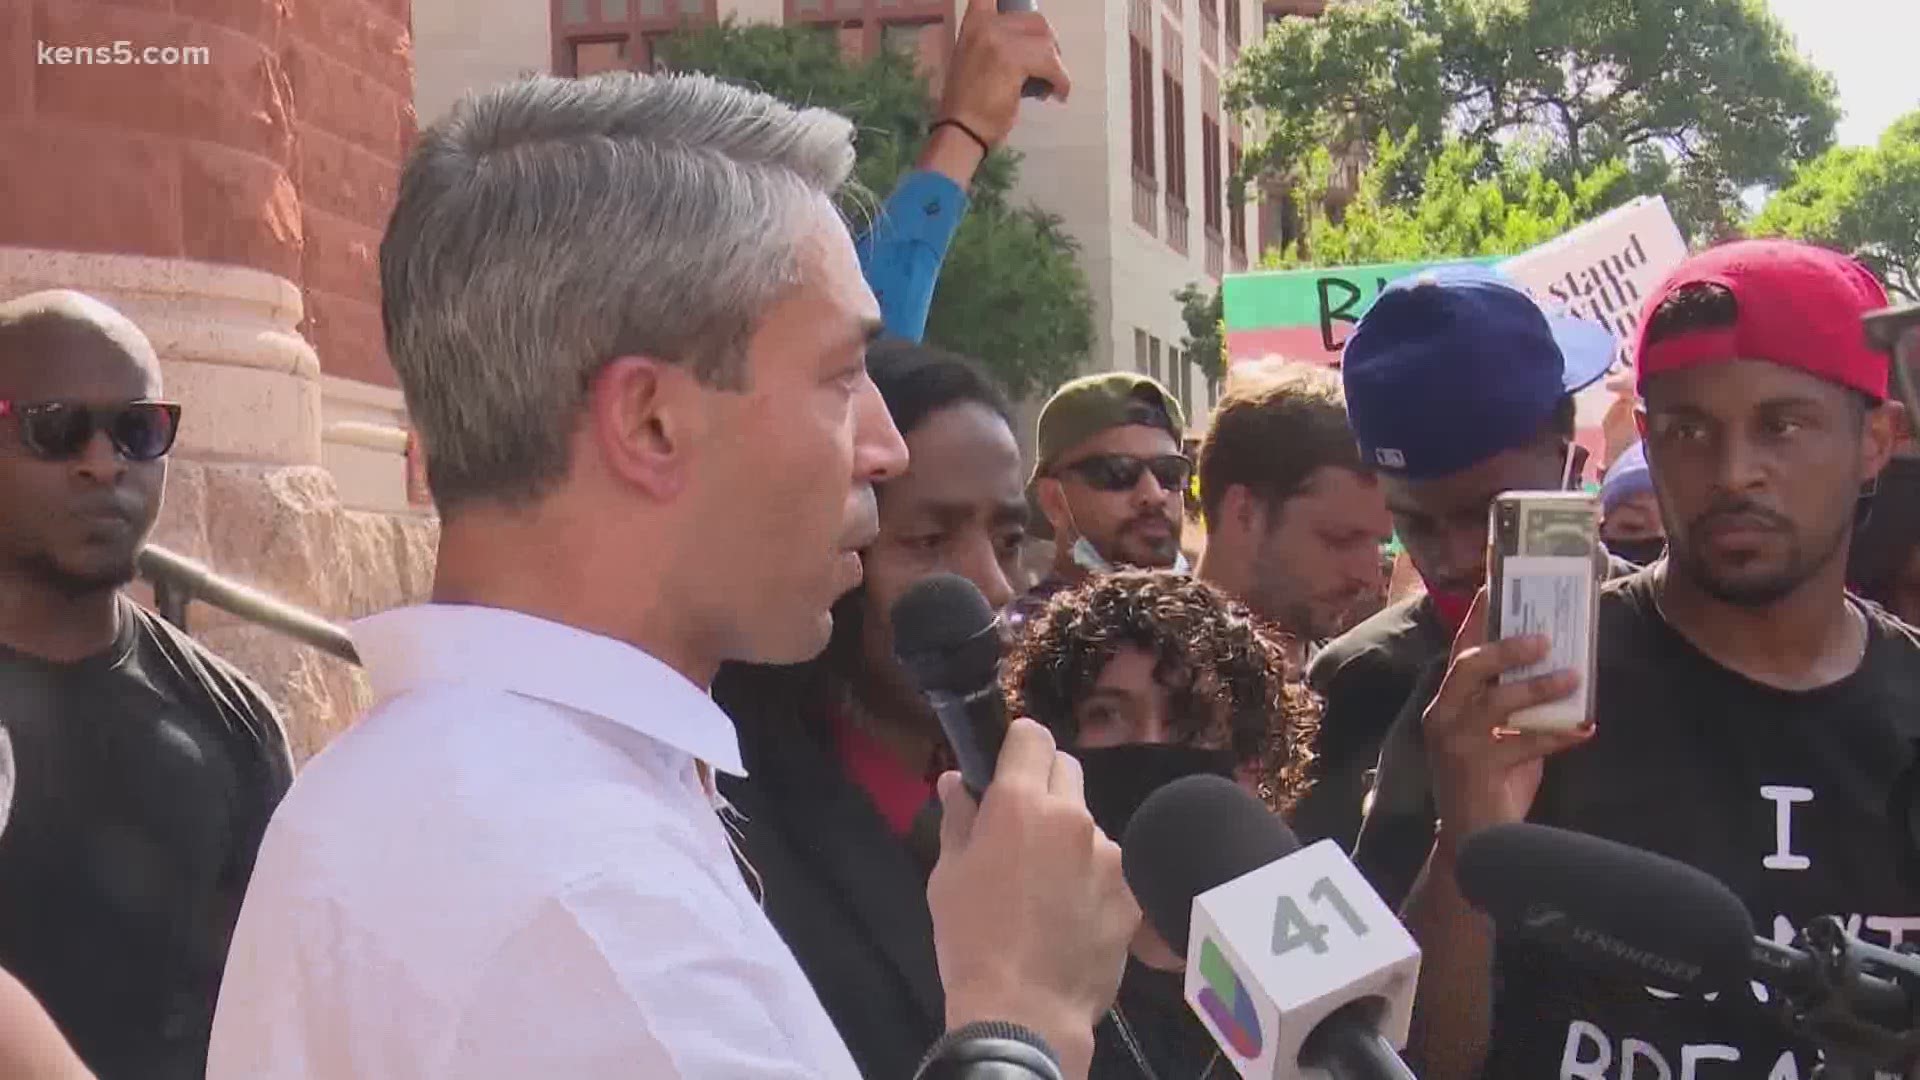 Mayor Ron Nirenberg addressed a sizeable crowd in the middle of a hot afternoon to say that he, too, is fed up with stagnant progress.